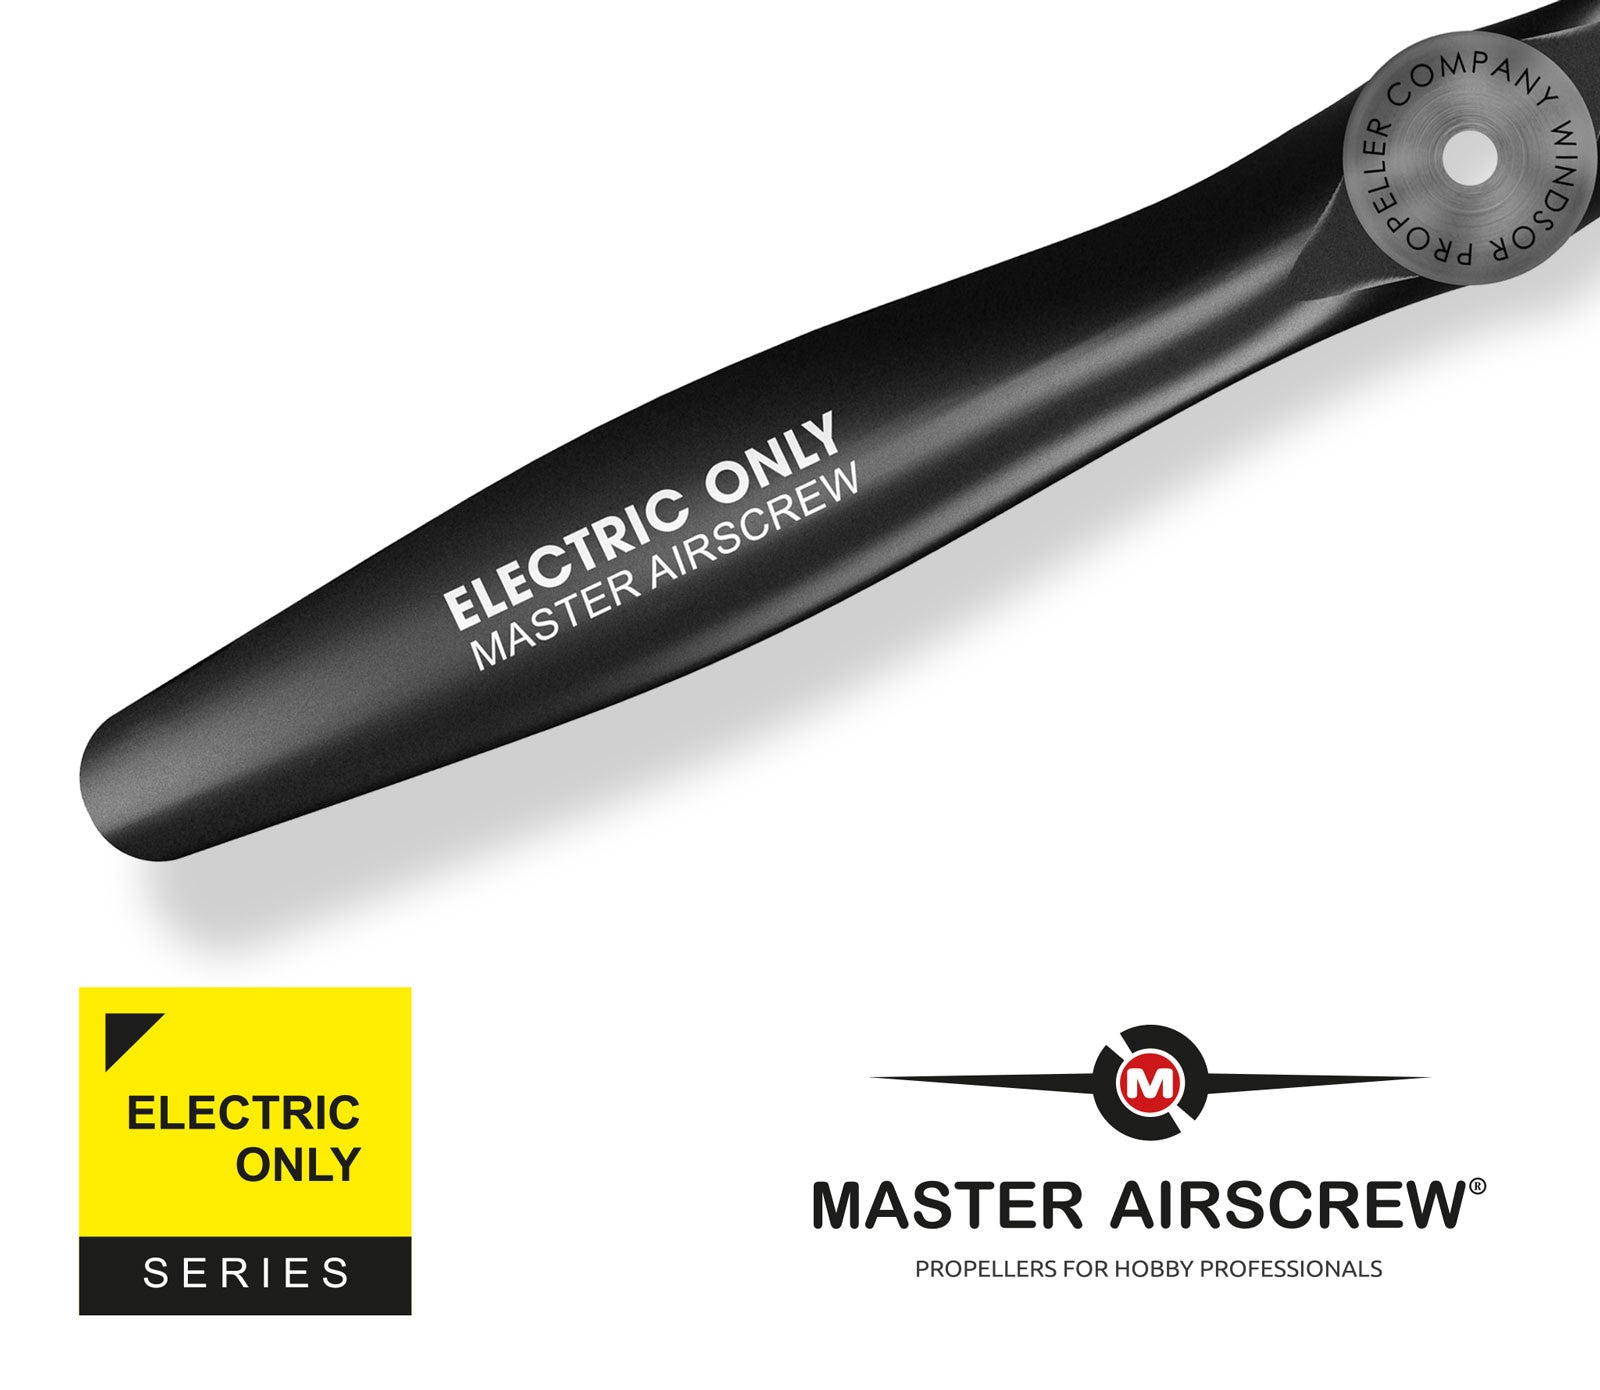 Electric Only - 14x6 Propeller - Master Airscrew